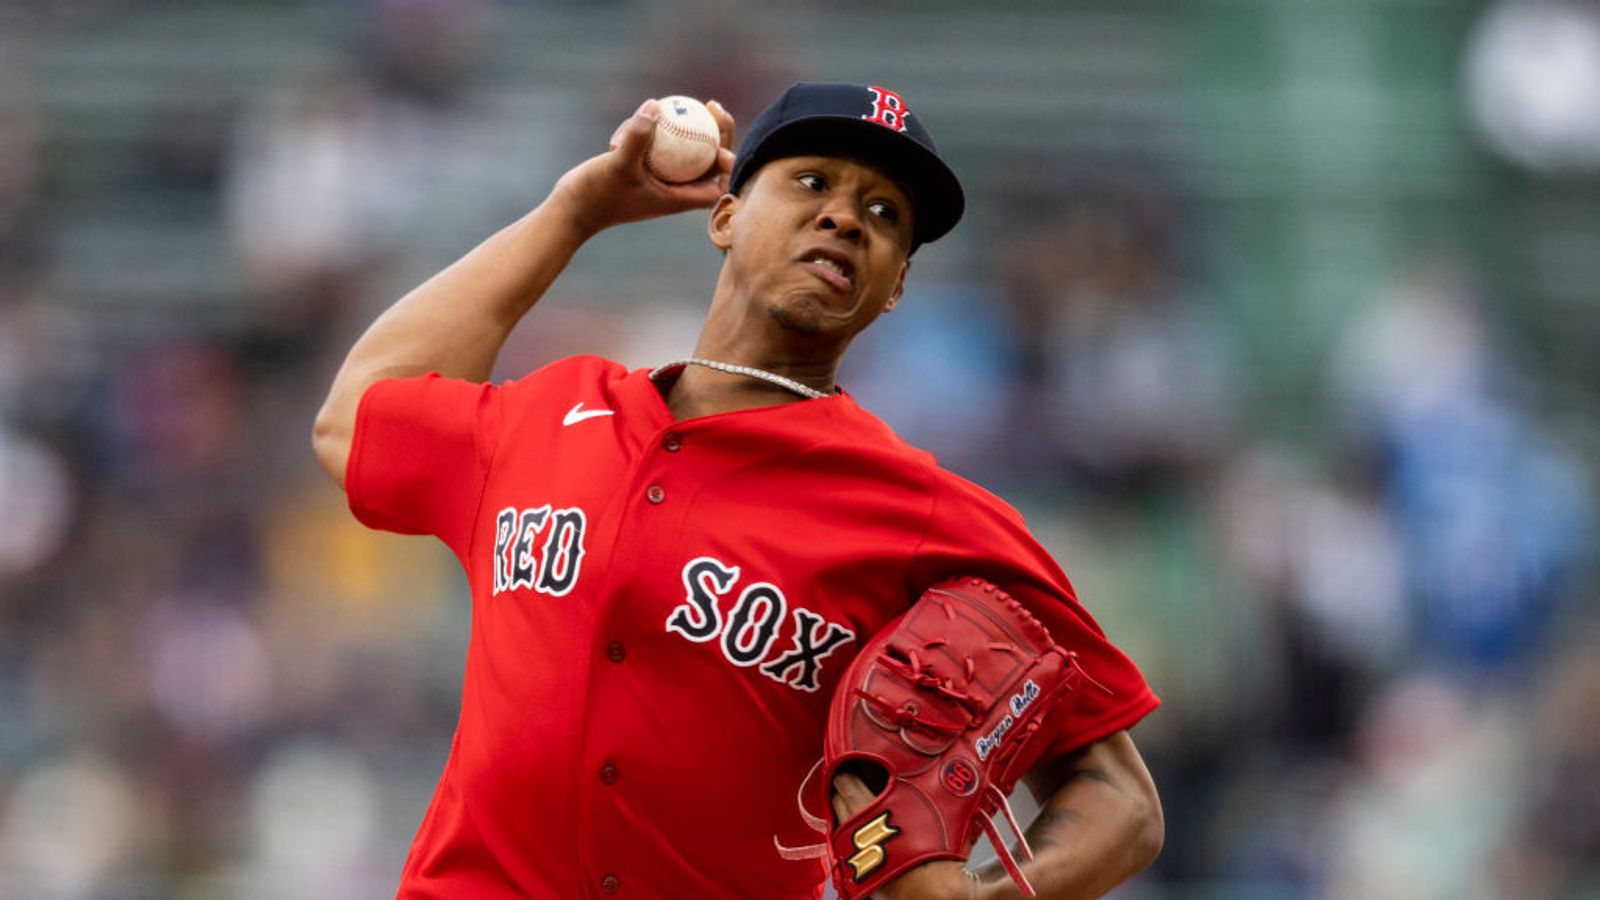 BSJ Live Coverage: Red Sox at Yankees, 7:05 p.m. - Bryan Bello and